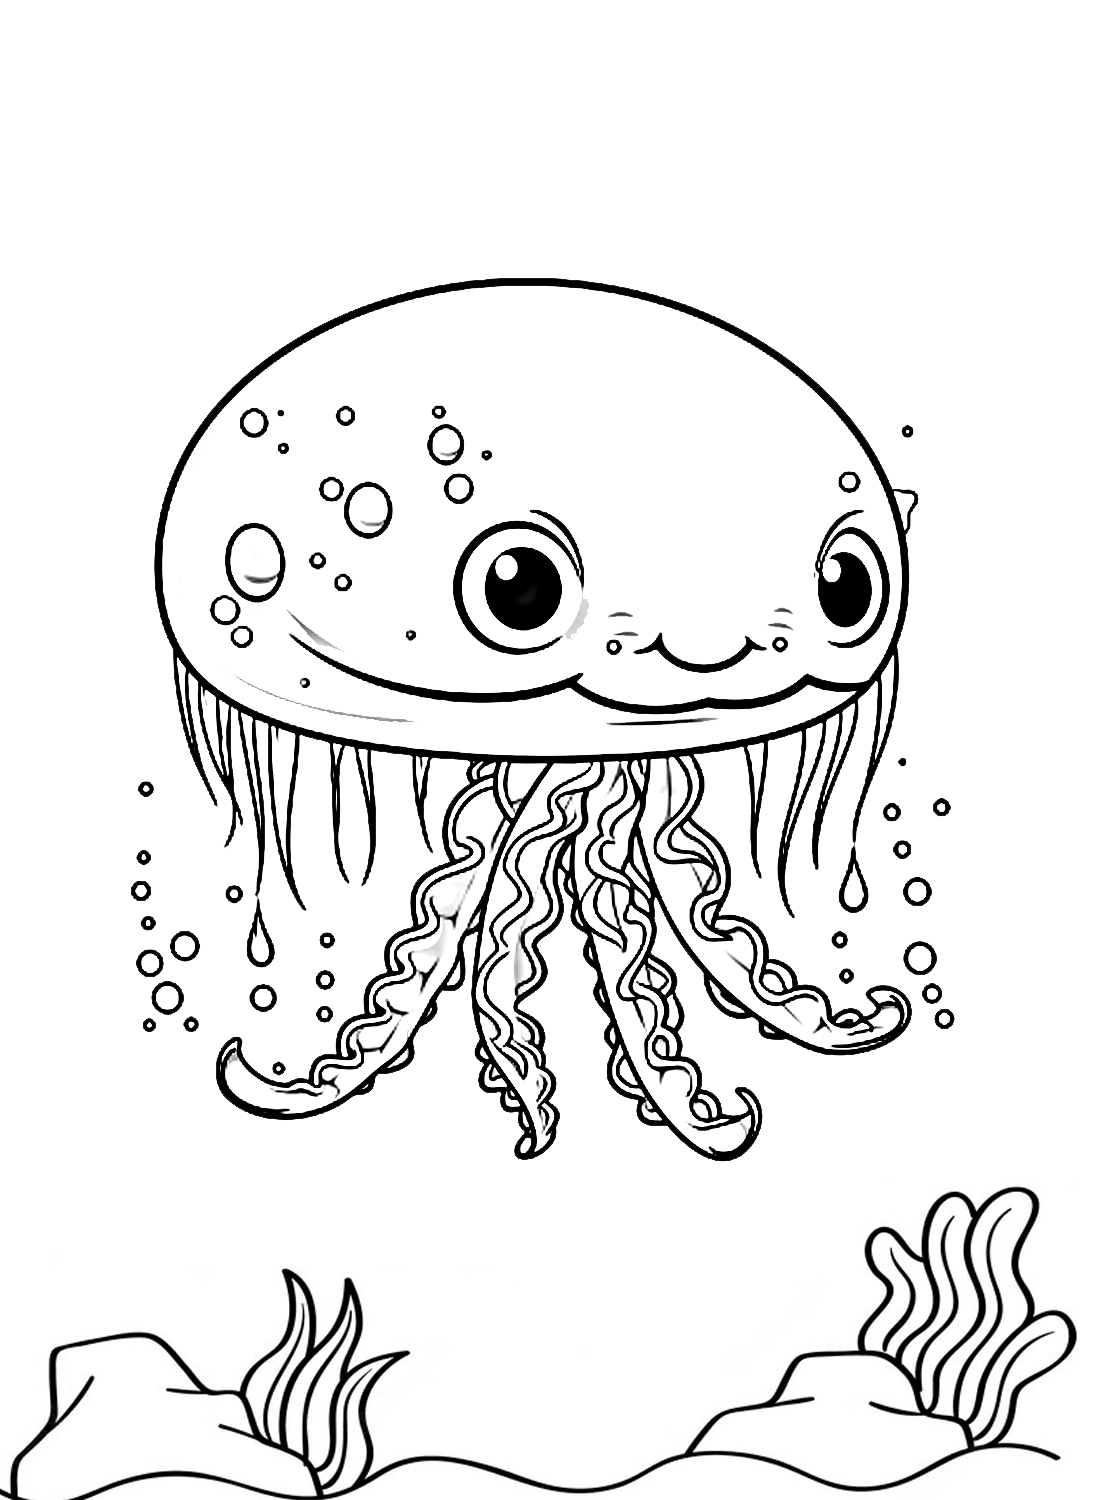 A fun Jellyfish Coloring Page